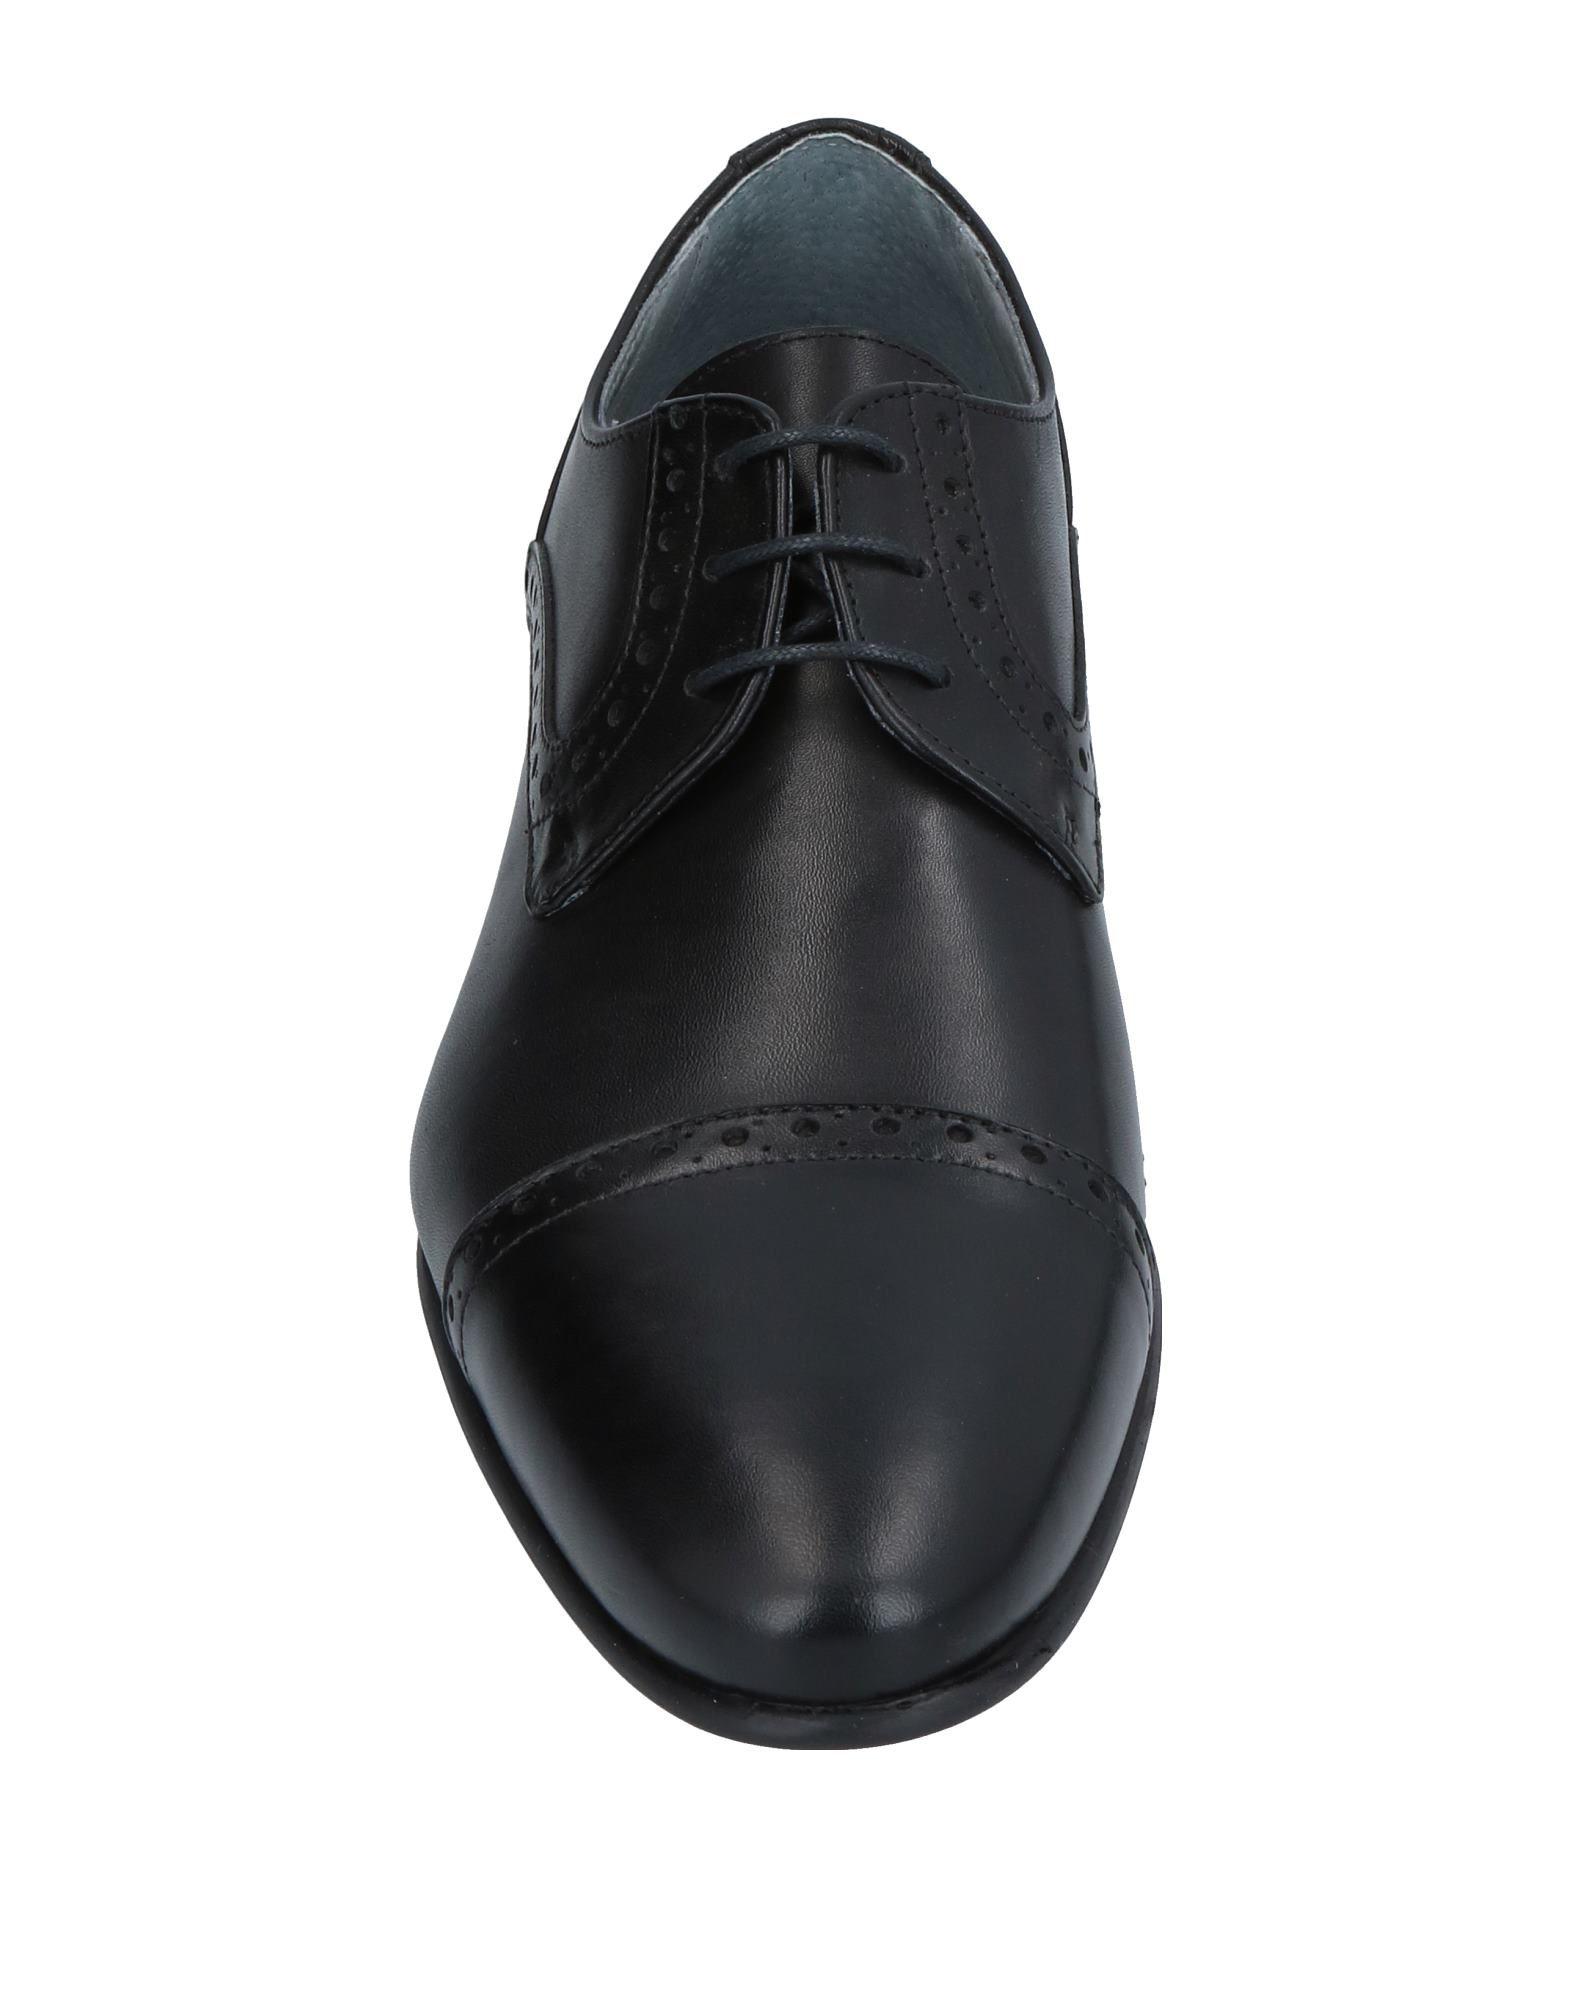 Fabiano Ricci Leather Lace-up Shoe in Black for Men - Lyst